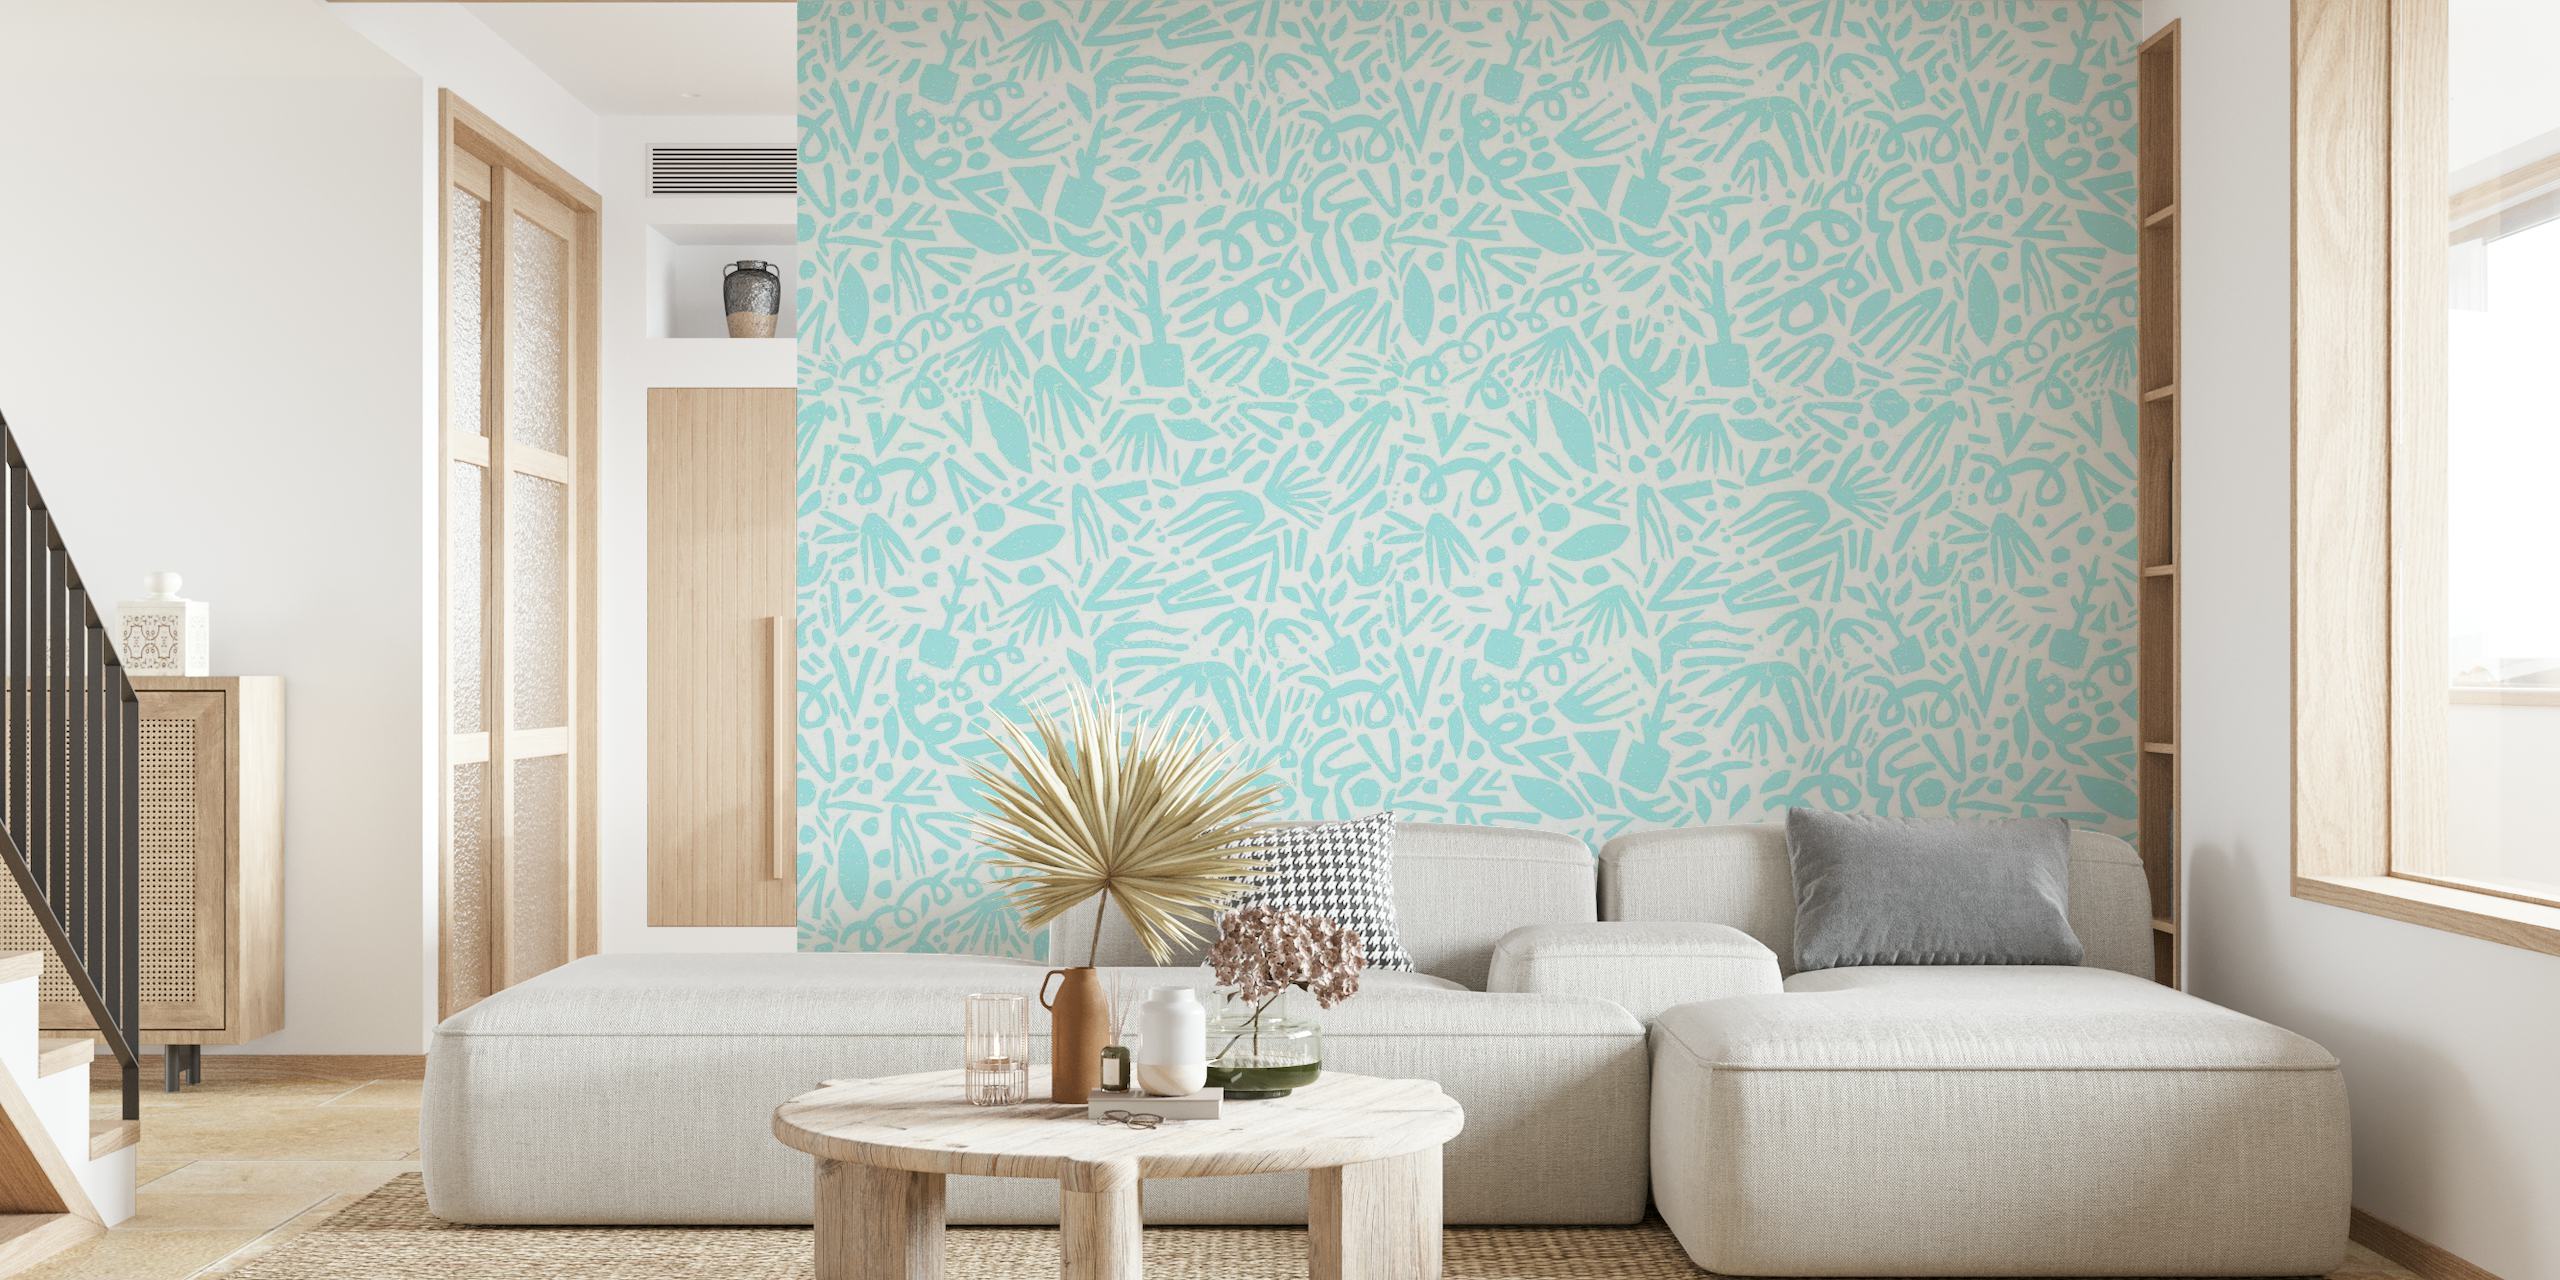 Nature-inspired wall mural with a calming botanical pattern